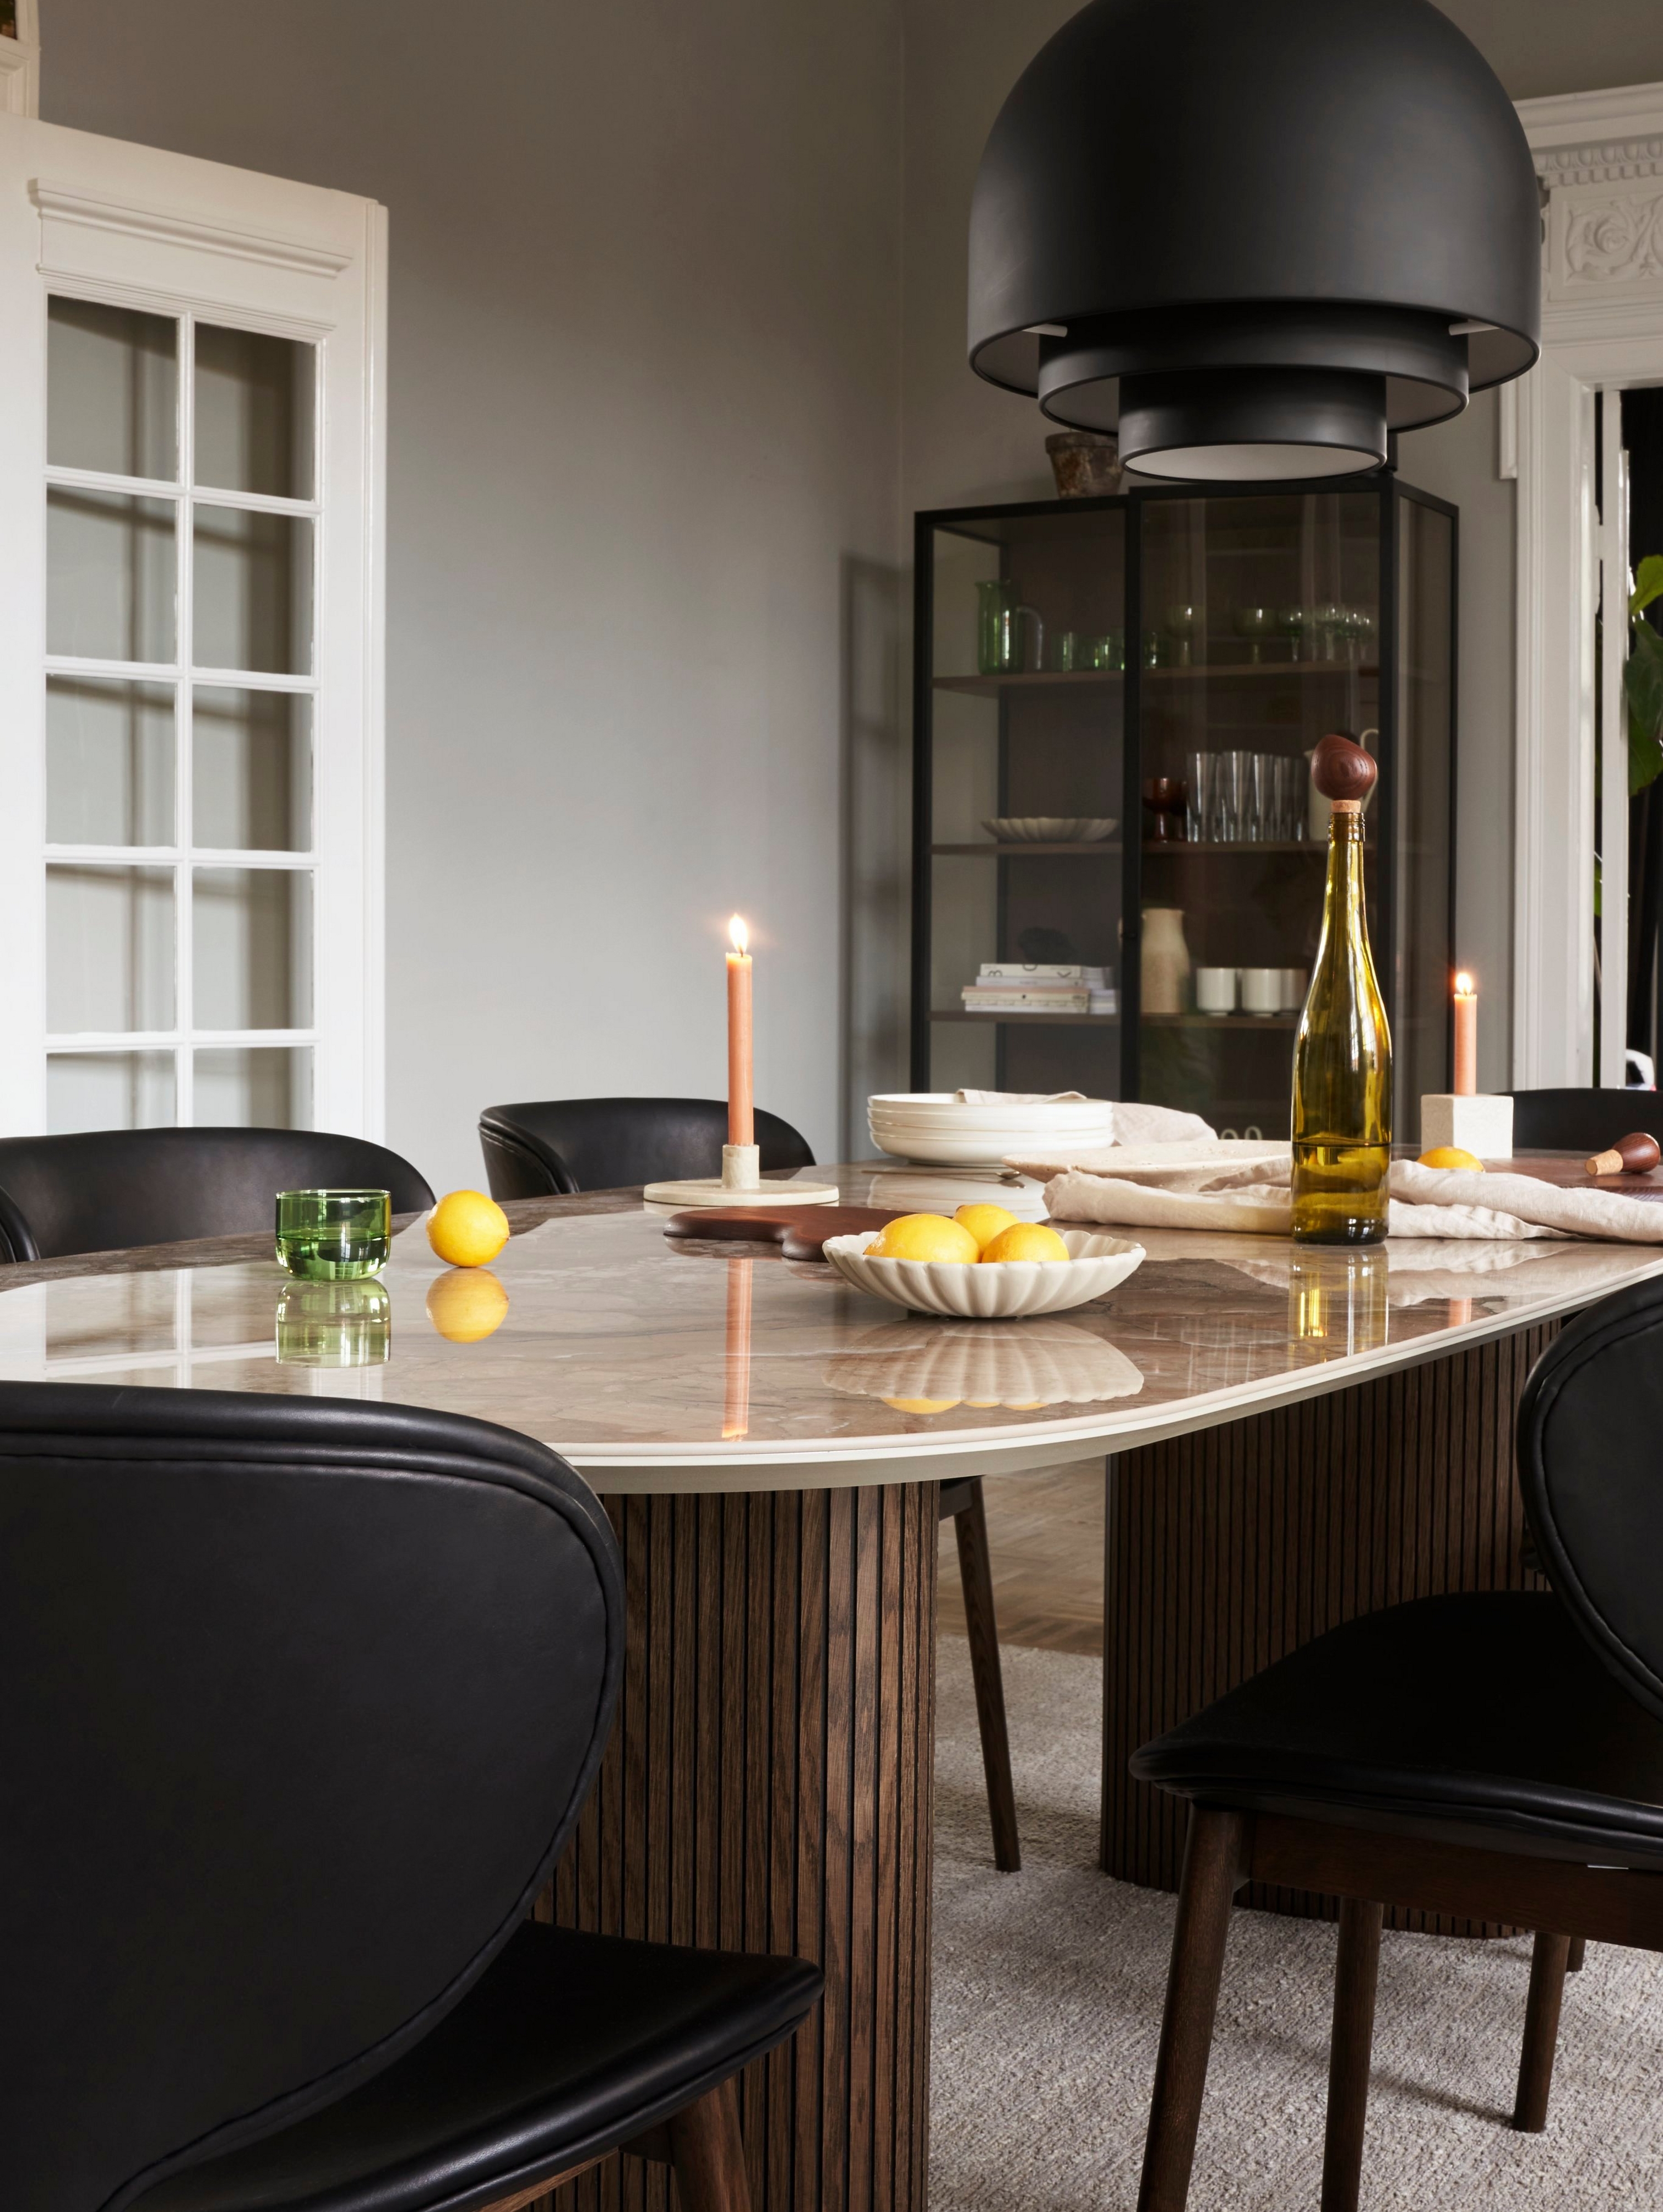 The Santiago dining table with candles, a fruit bowl, a wine bottle and more.